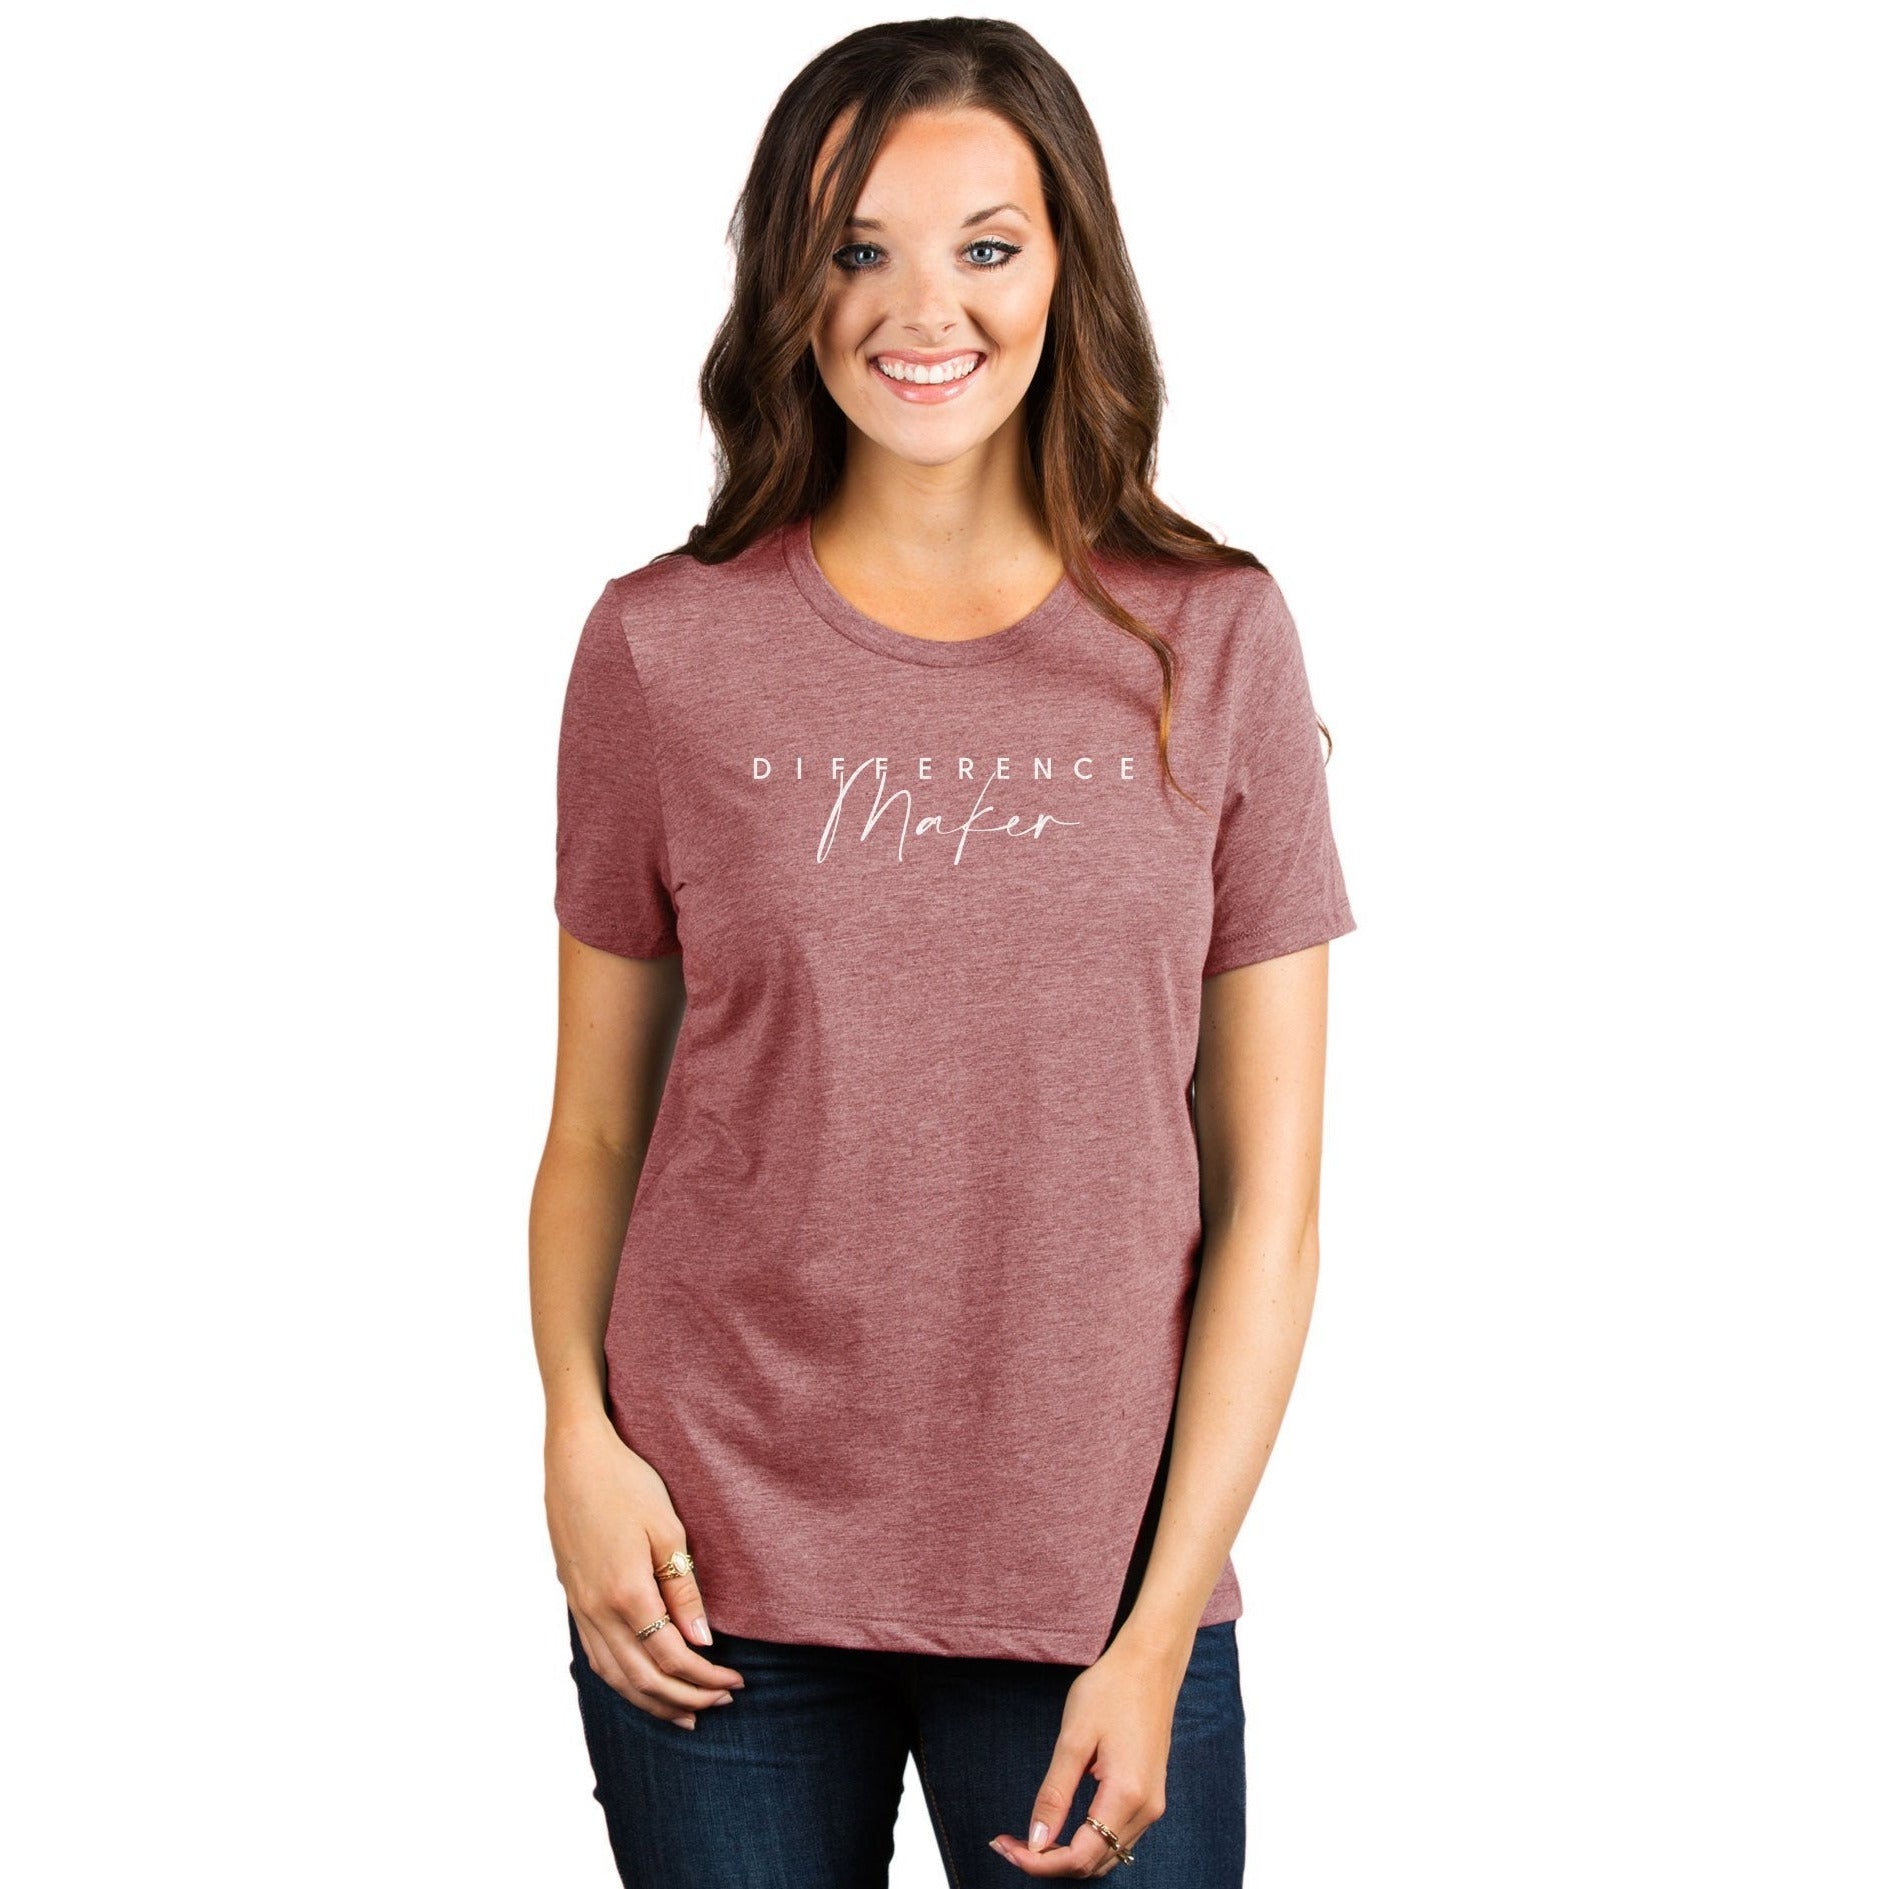 Difference Maker Women's Relaxed Crewneck T-Shirt Top Tee Heather Rouge Model
